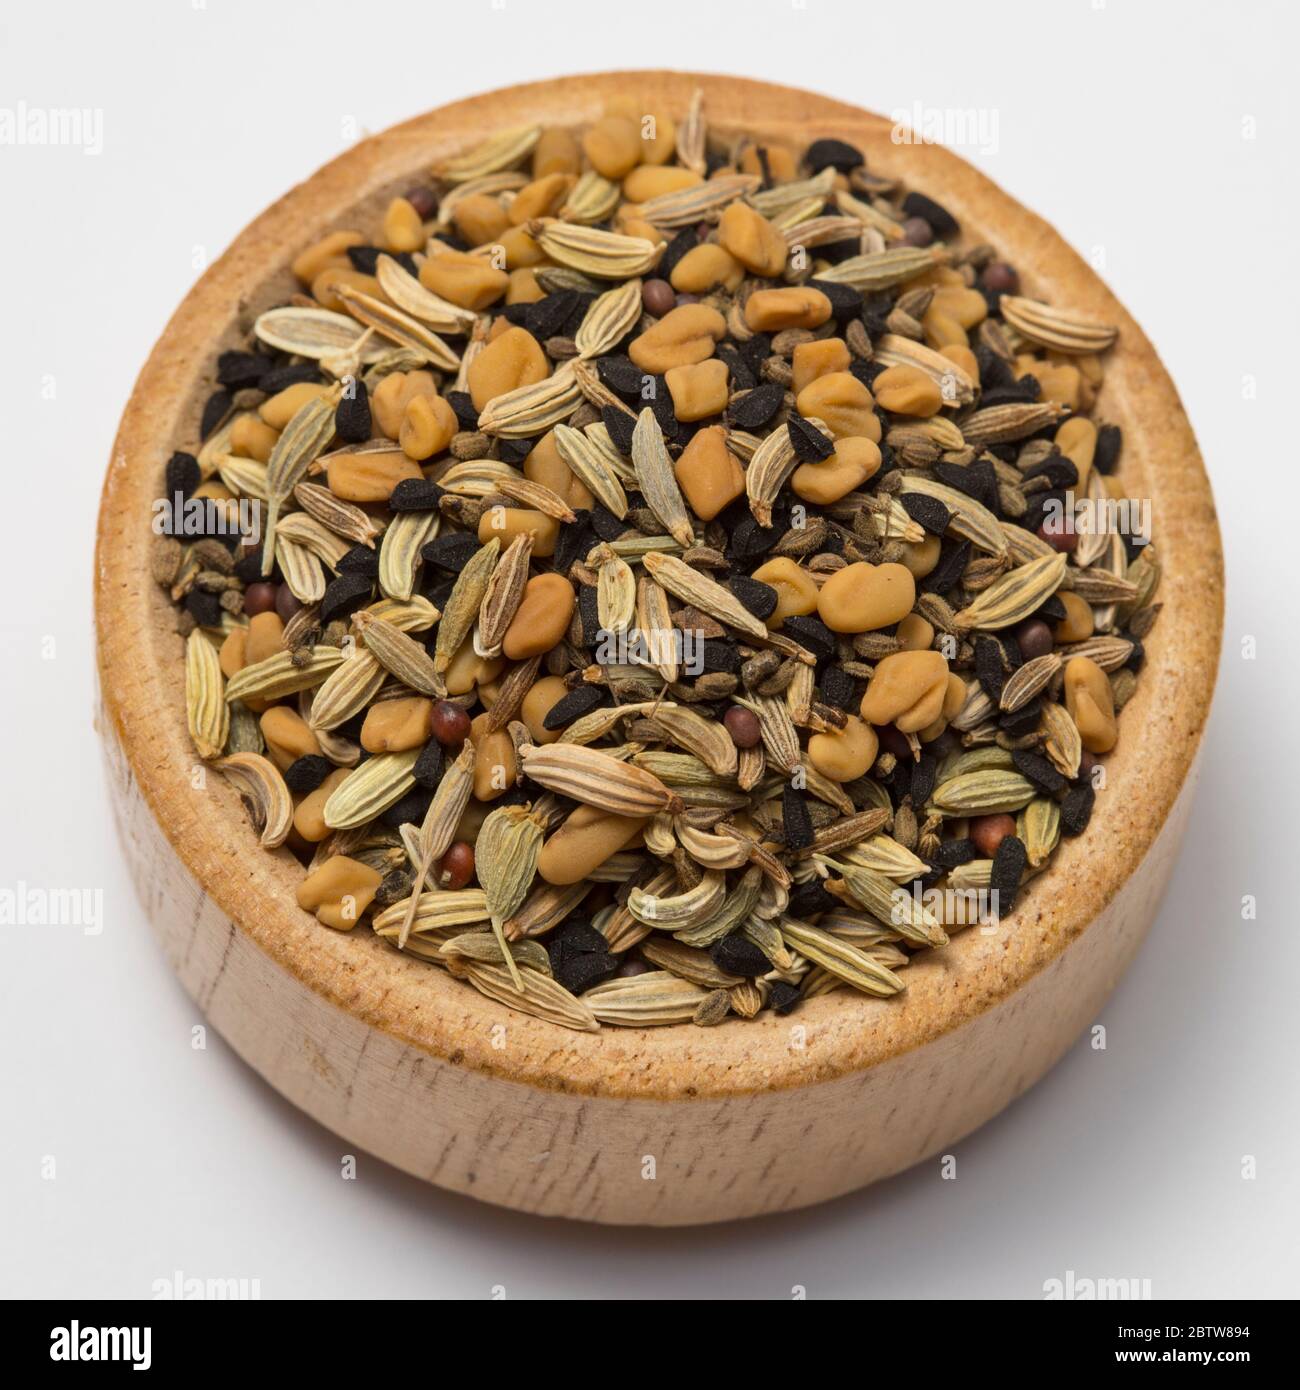 Panch phoron is a whole spice blend, originating from the Indian subcontinent. Stock Photo